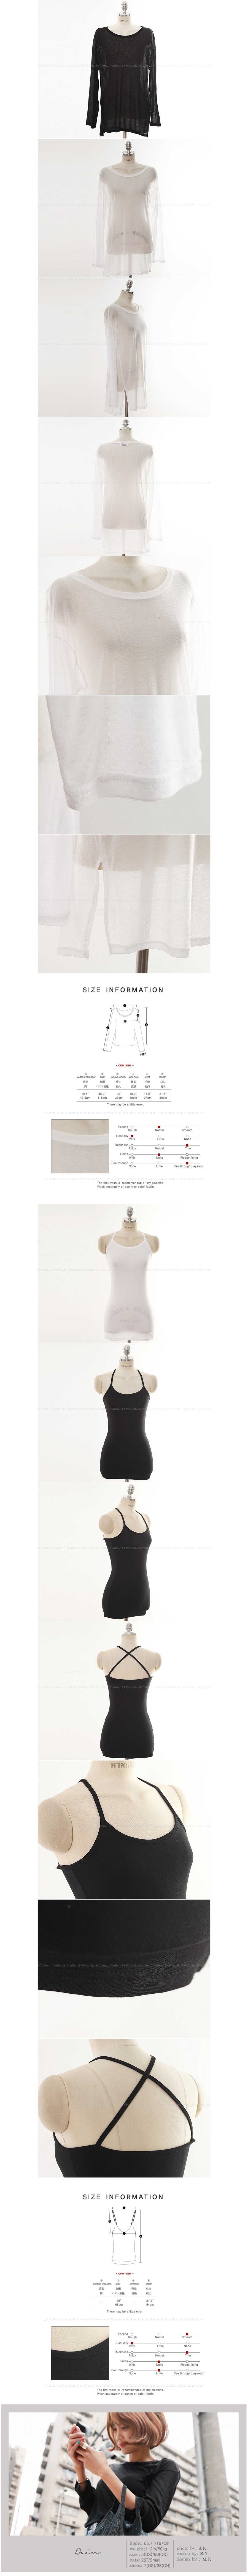 [Special Offer] 100% Tencel Organic T-shirt and Tank Top 2 Pieces Set #Black One Size(Free)